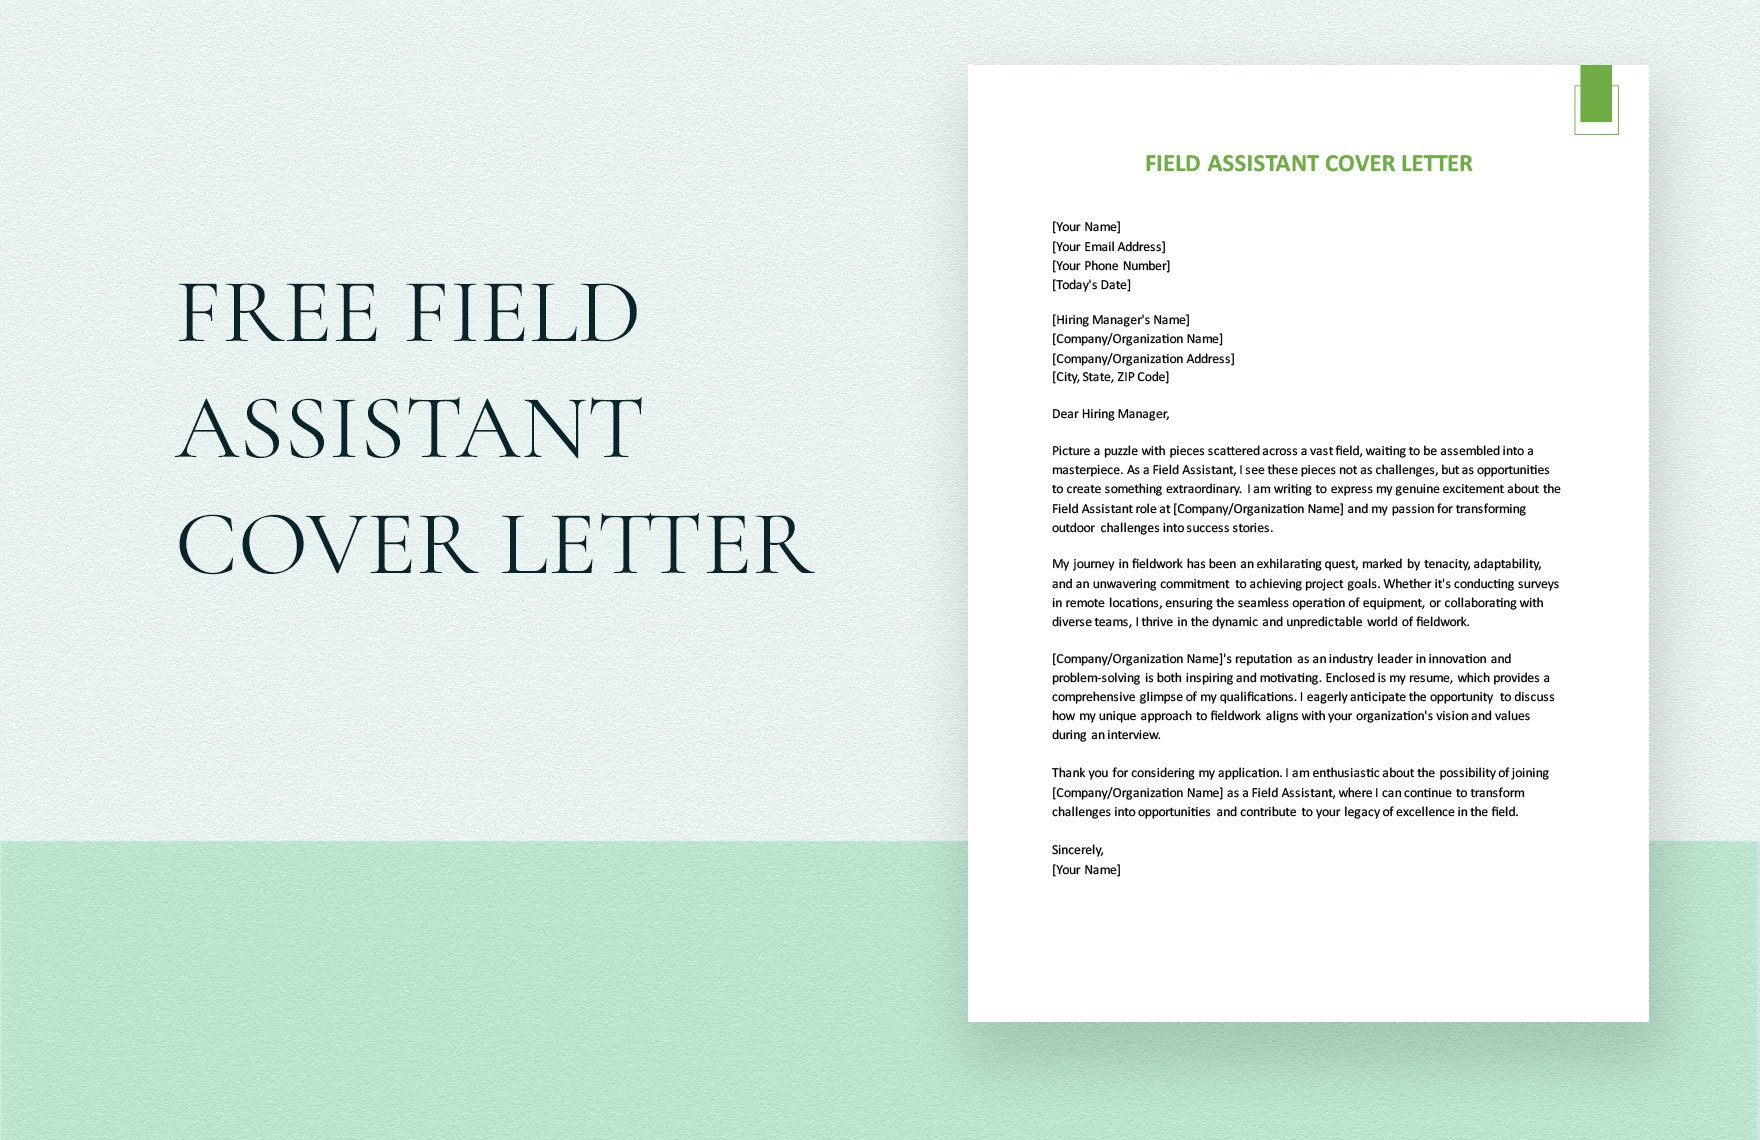 Field Assistant Cover Letter in Word, Google Docs, PDF